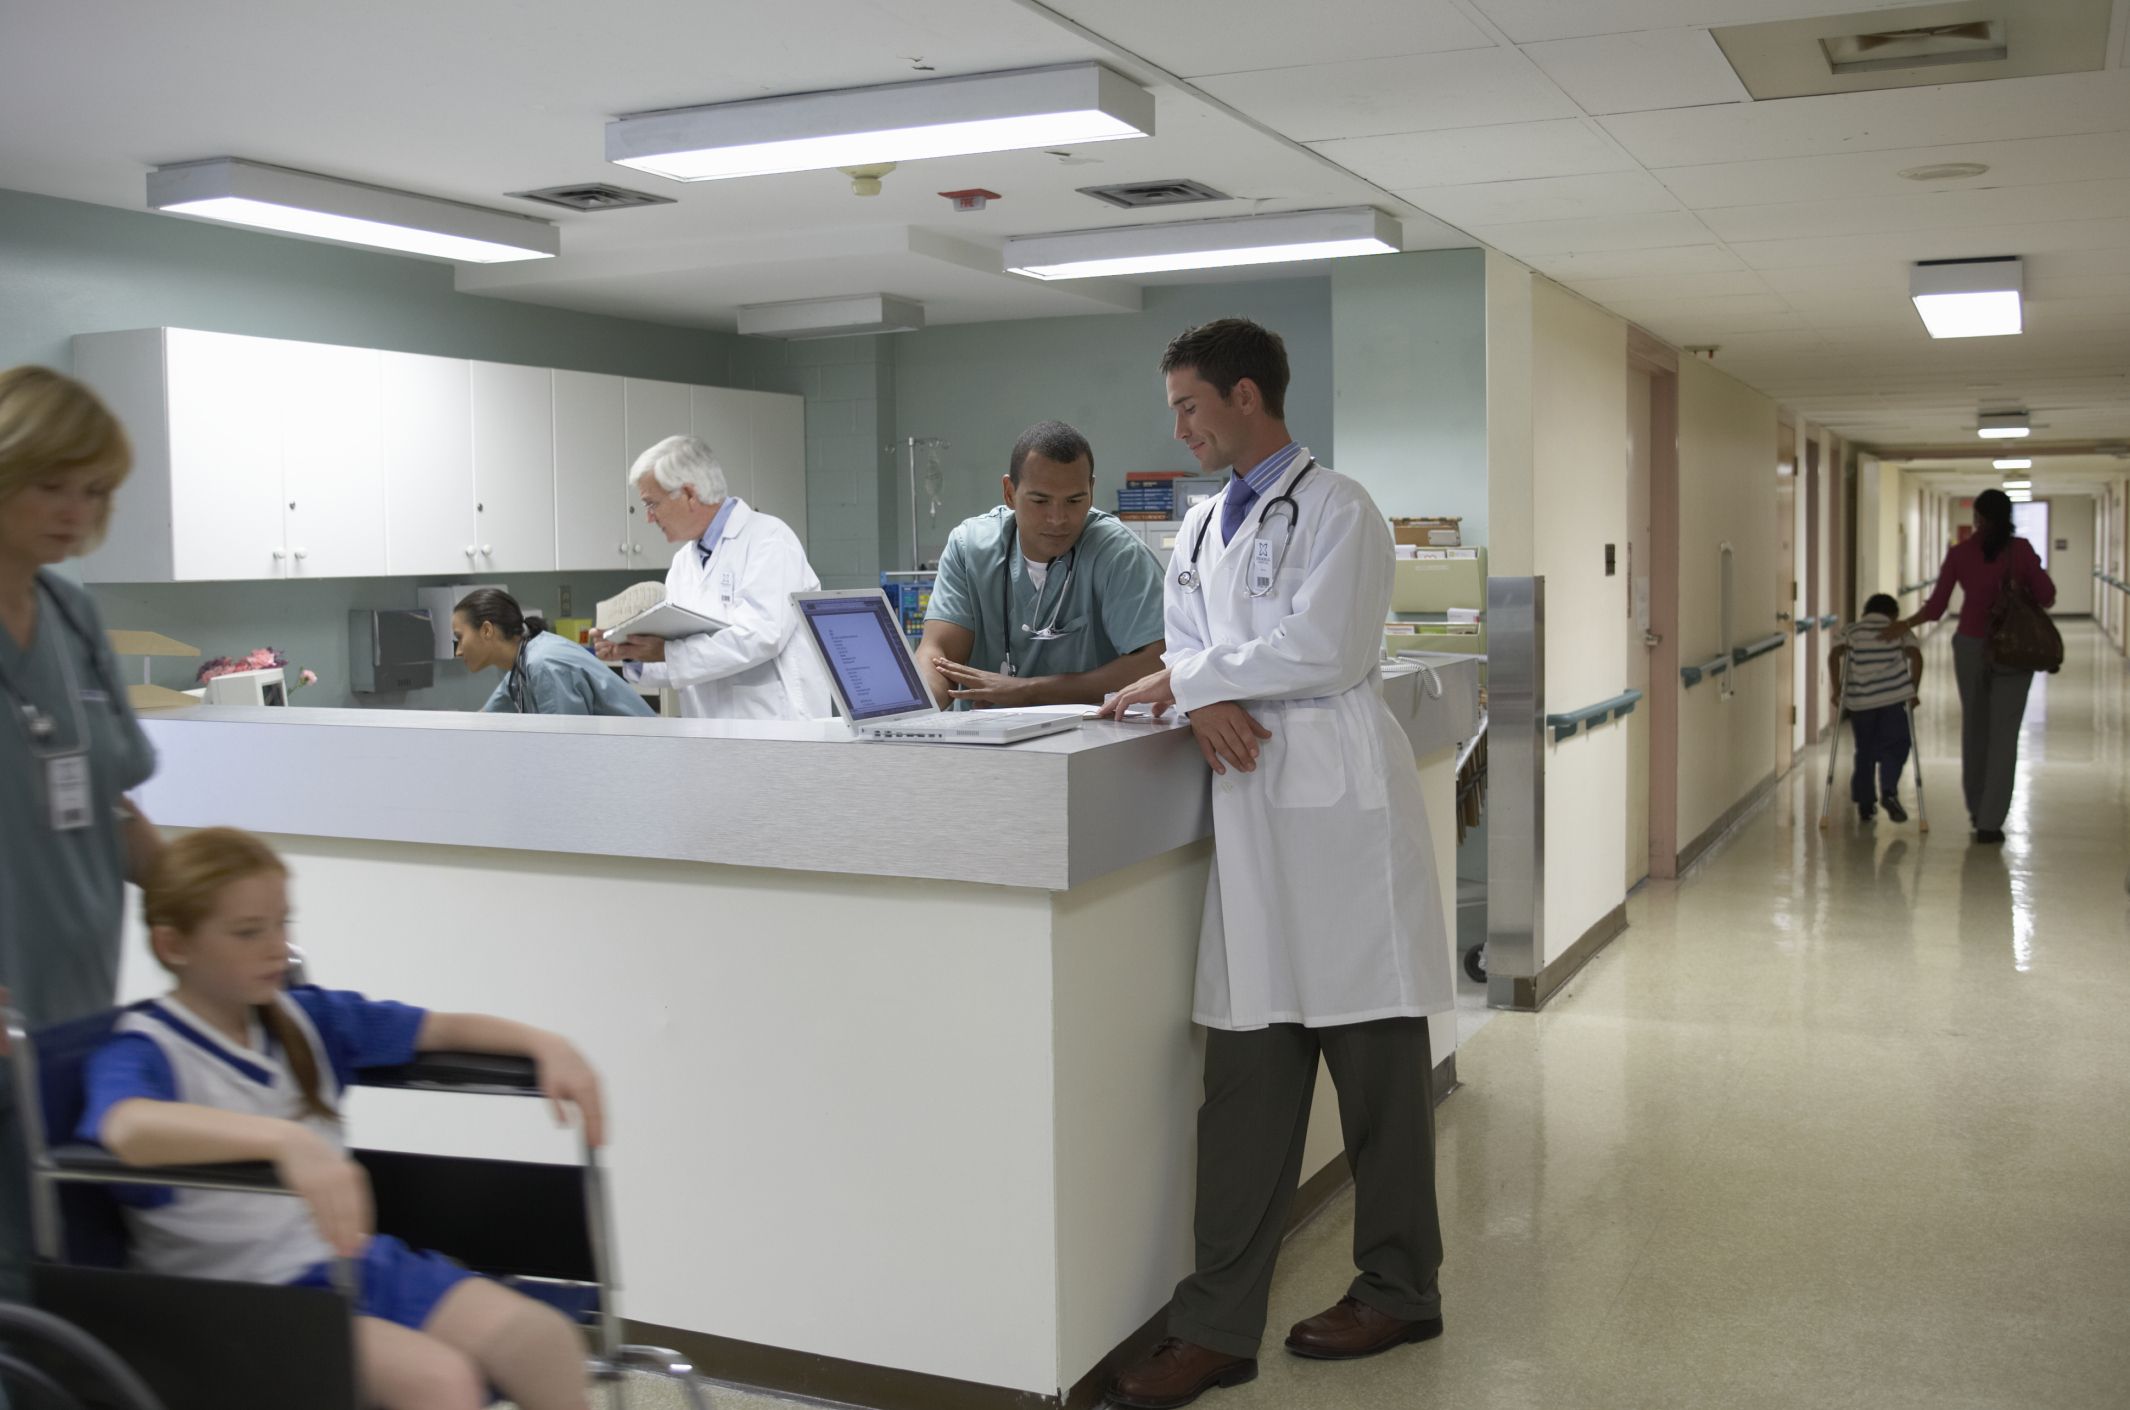 Hospitals are being forced to reevaluate every aspect of patient medical information storage.